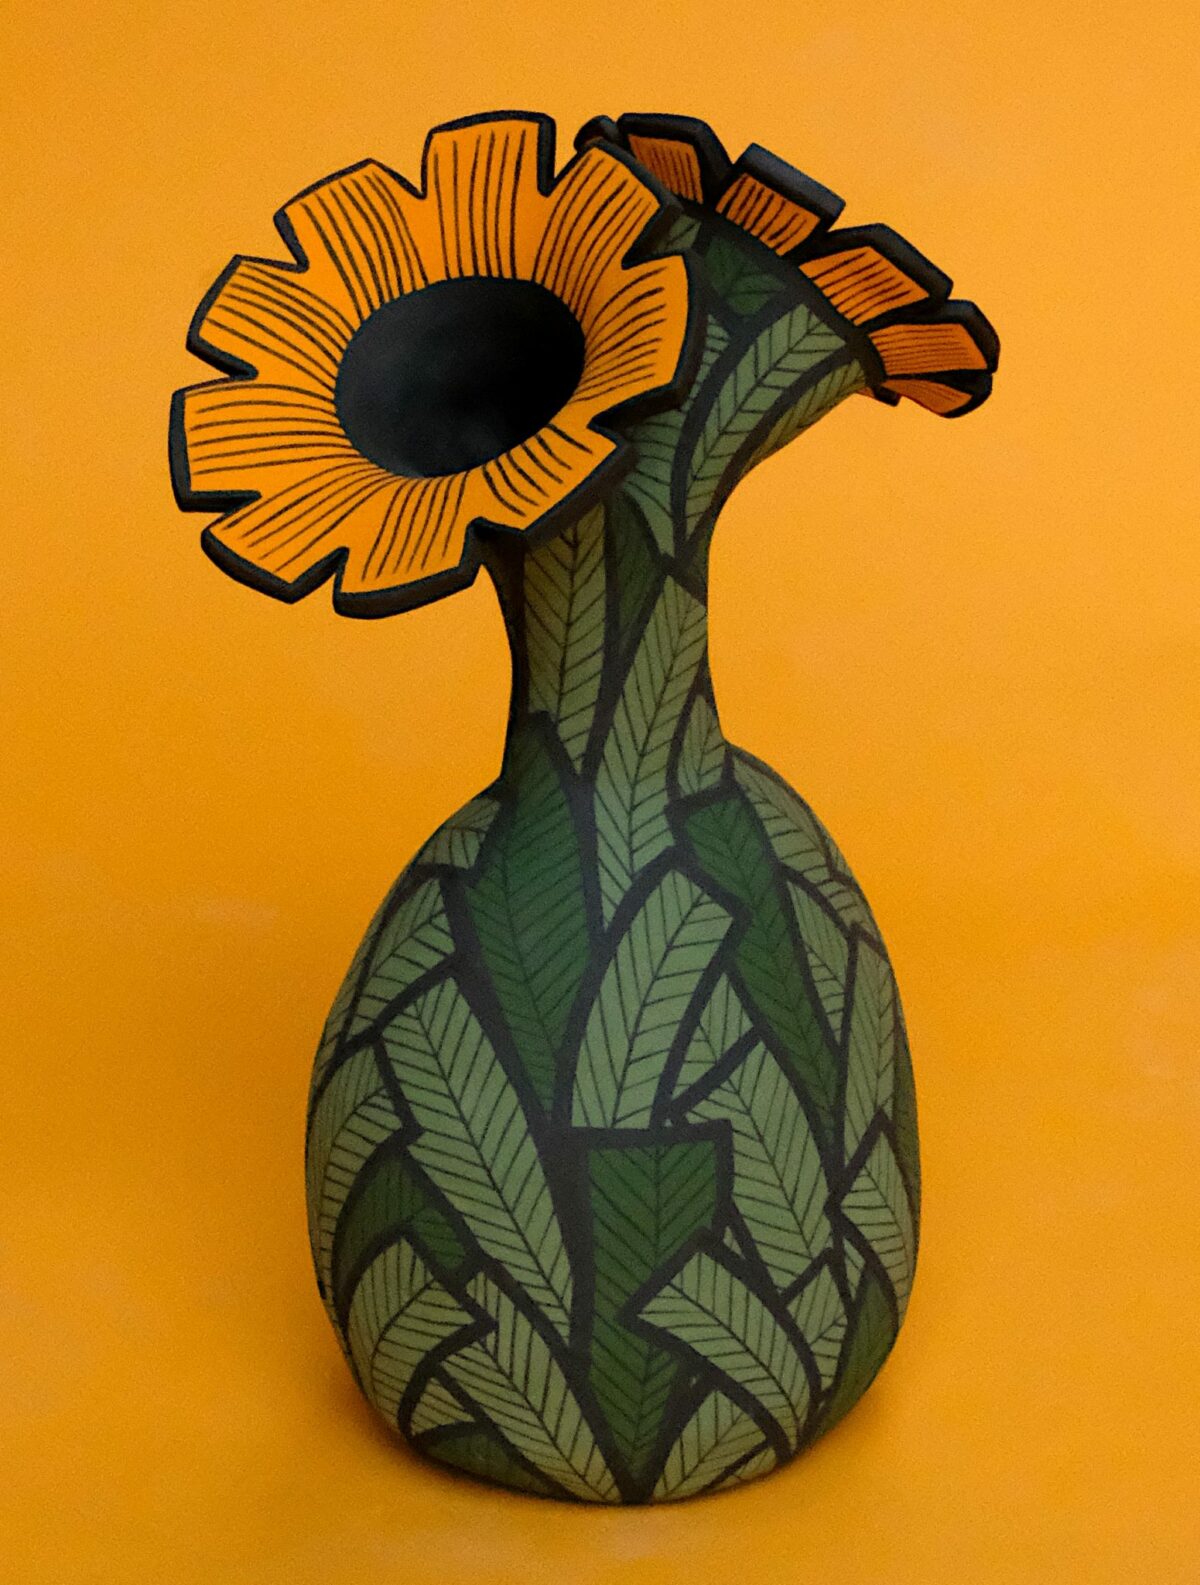 Vibrant Art Pieces That Fuse Ceramics With Drawings By Ariana Heinzman 12